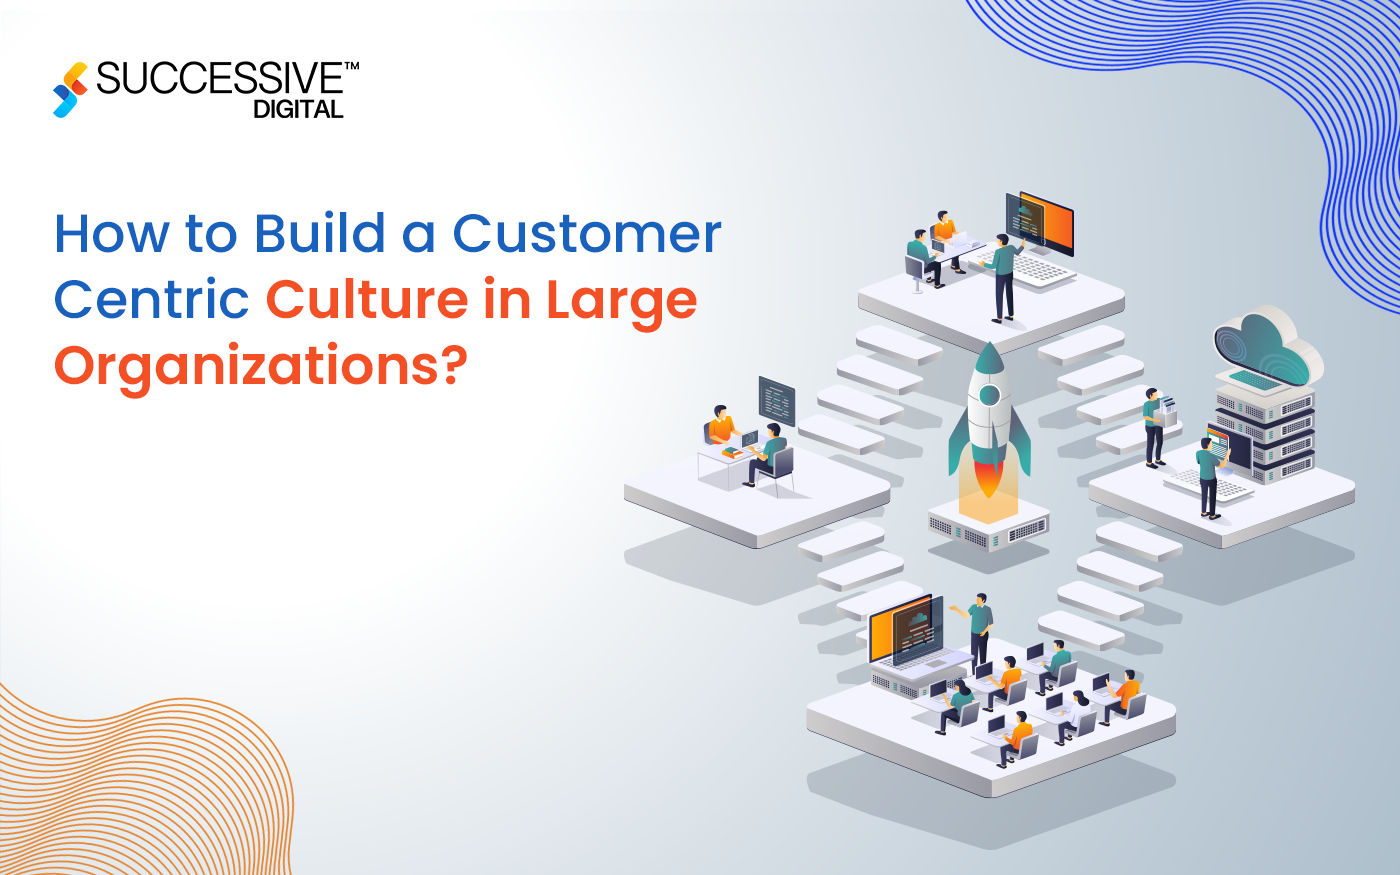 How to Build a Customer-Centric Culture in Large Organizations?